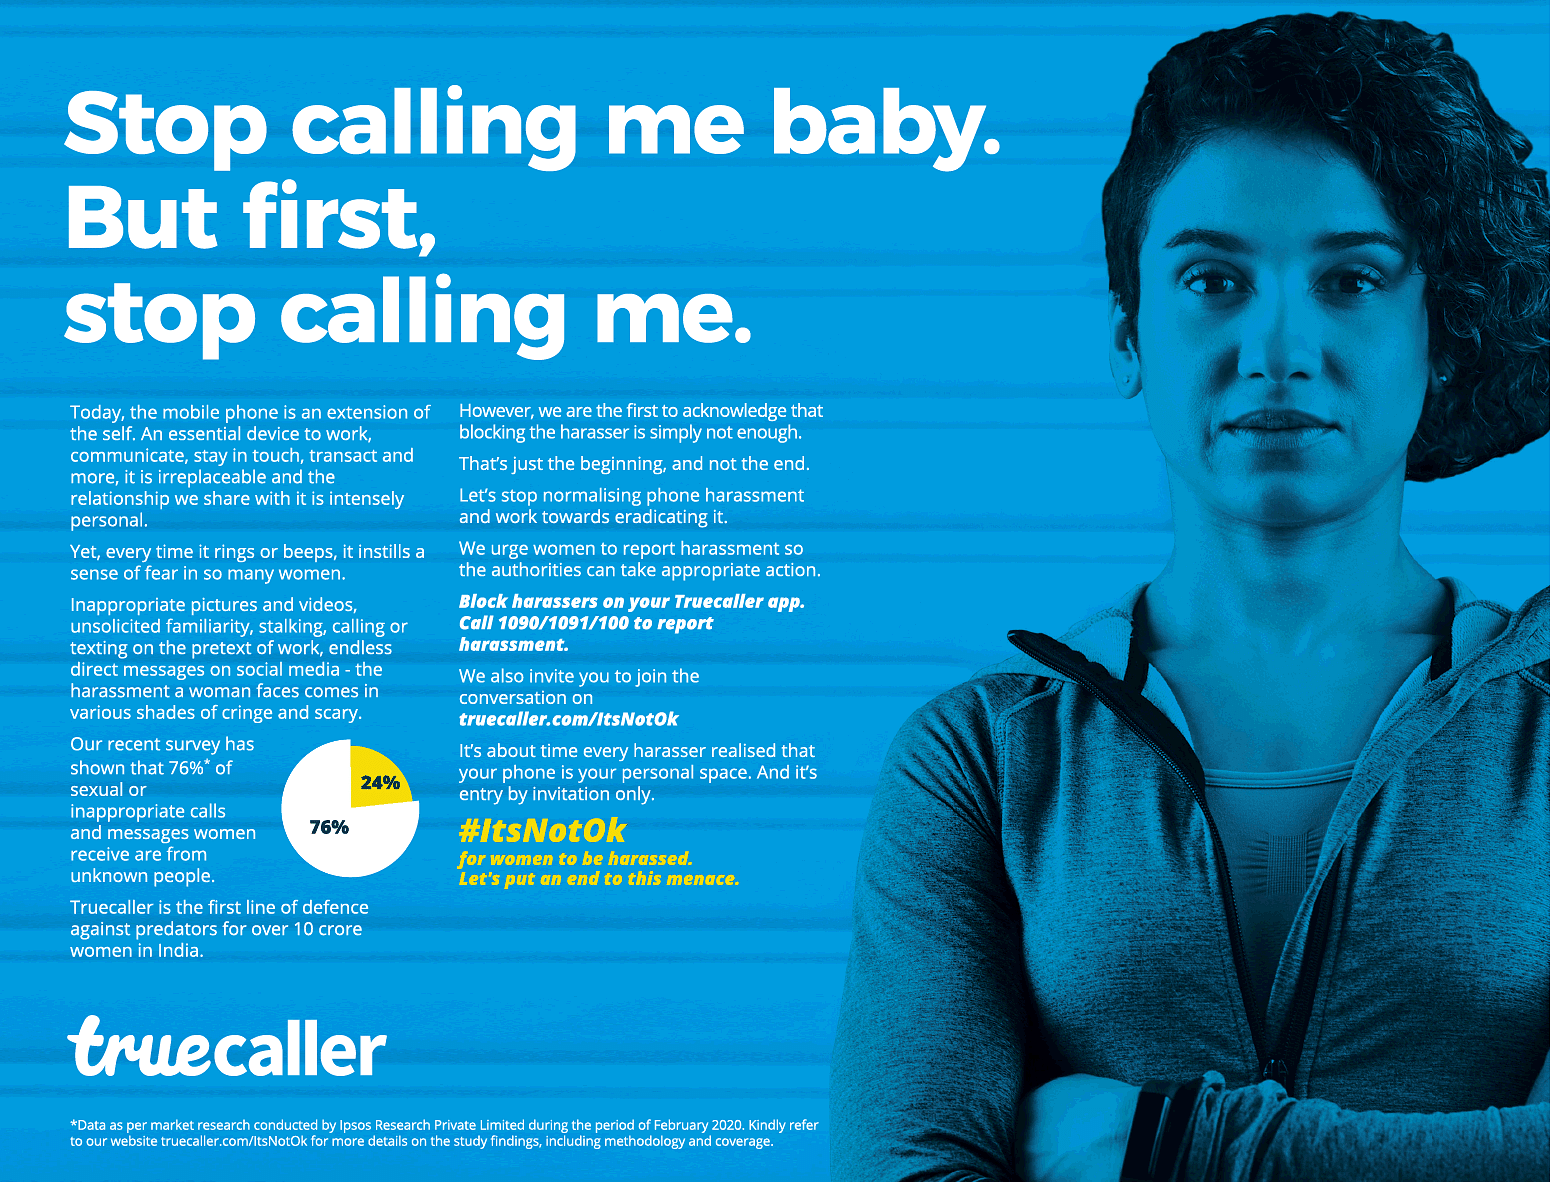 One of the ads issued in newspapers | Credit: Truecaller